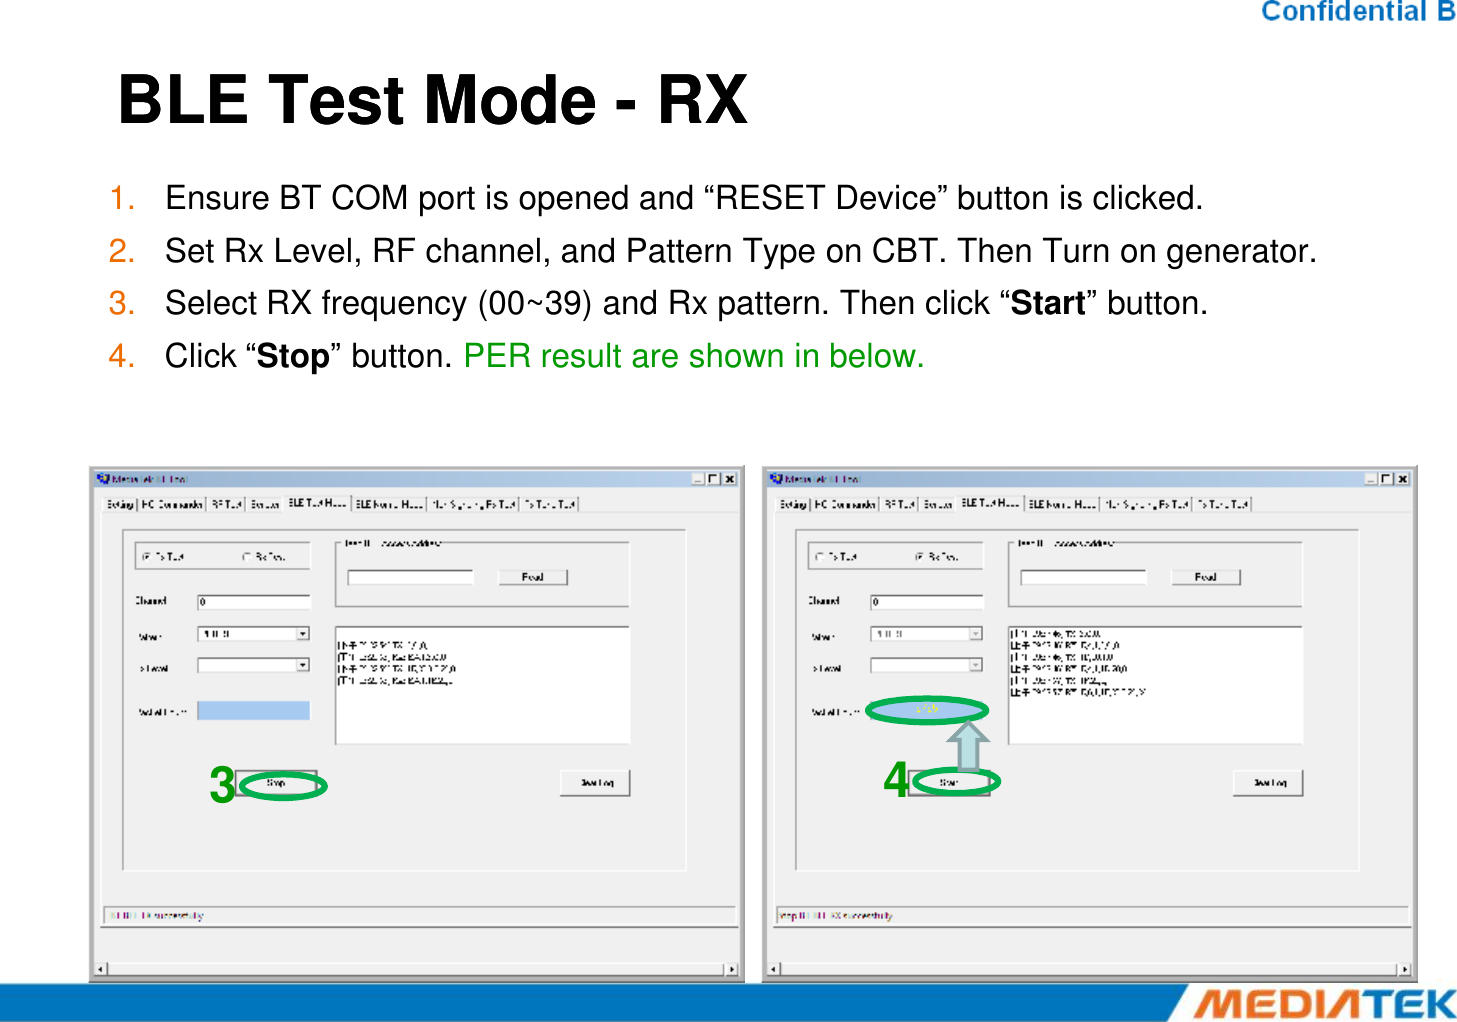 BLE Test Mode BLE Test Mode --RXRX1. Ensure BT COM port is opened and “RESET Device” button is clicked.2. Set Rx Level, RF channel, and Pattern Type on CBT. Then Turn on generator.3. Select RX frequency (00~39) and Rx pattern. Then click “Start” button.4. Click “Stop” button. PER result are shown in below.34